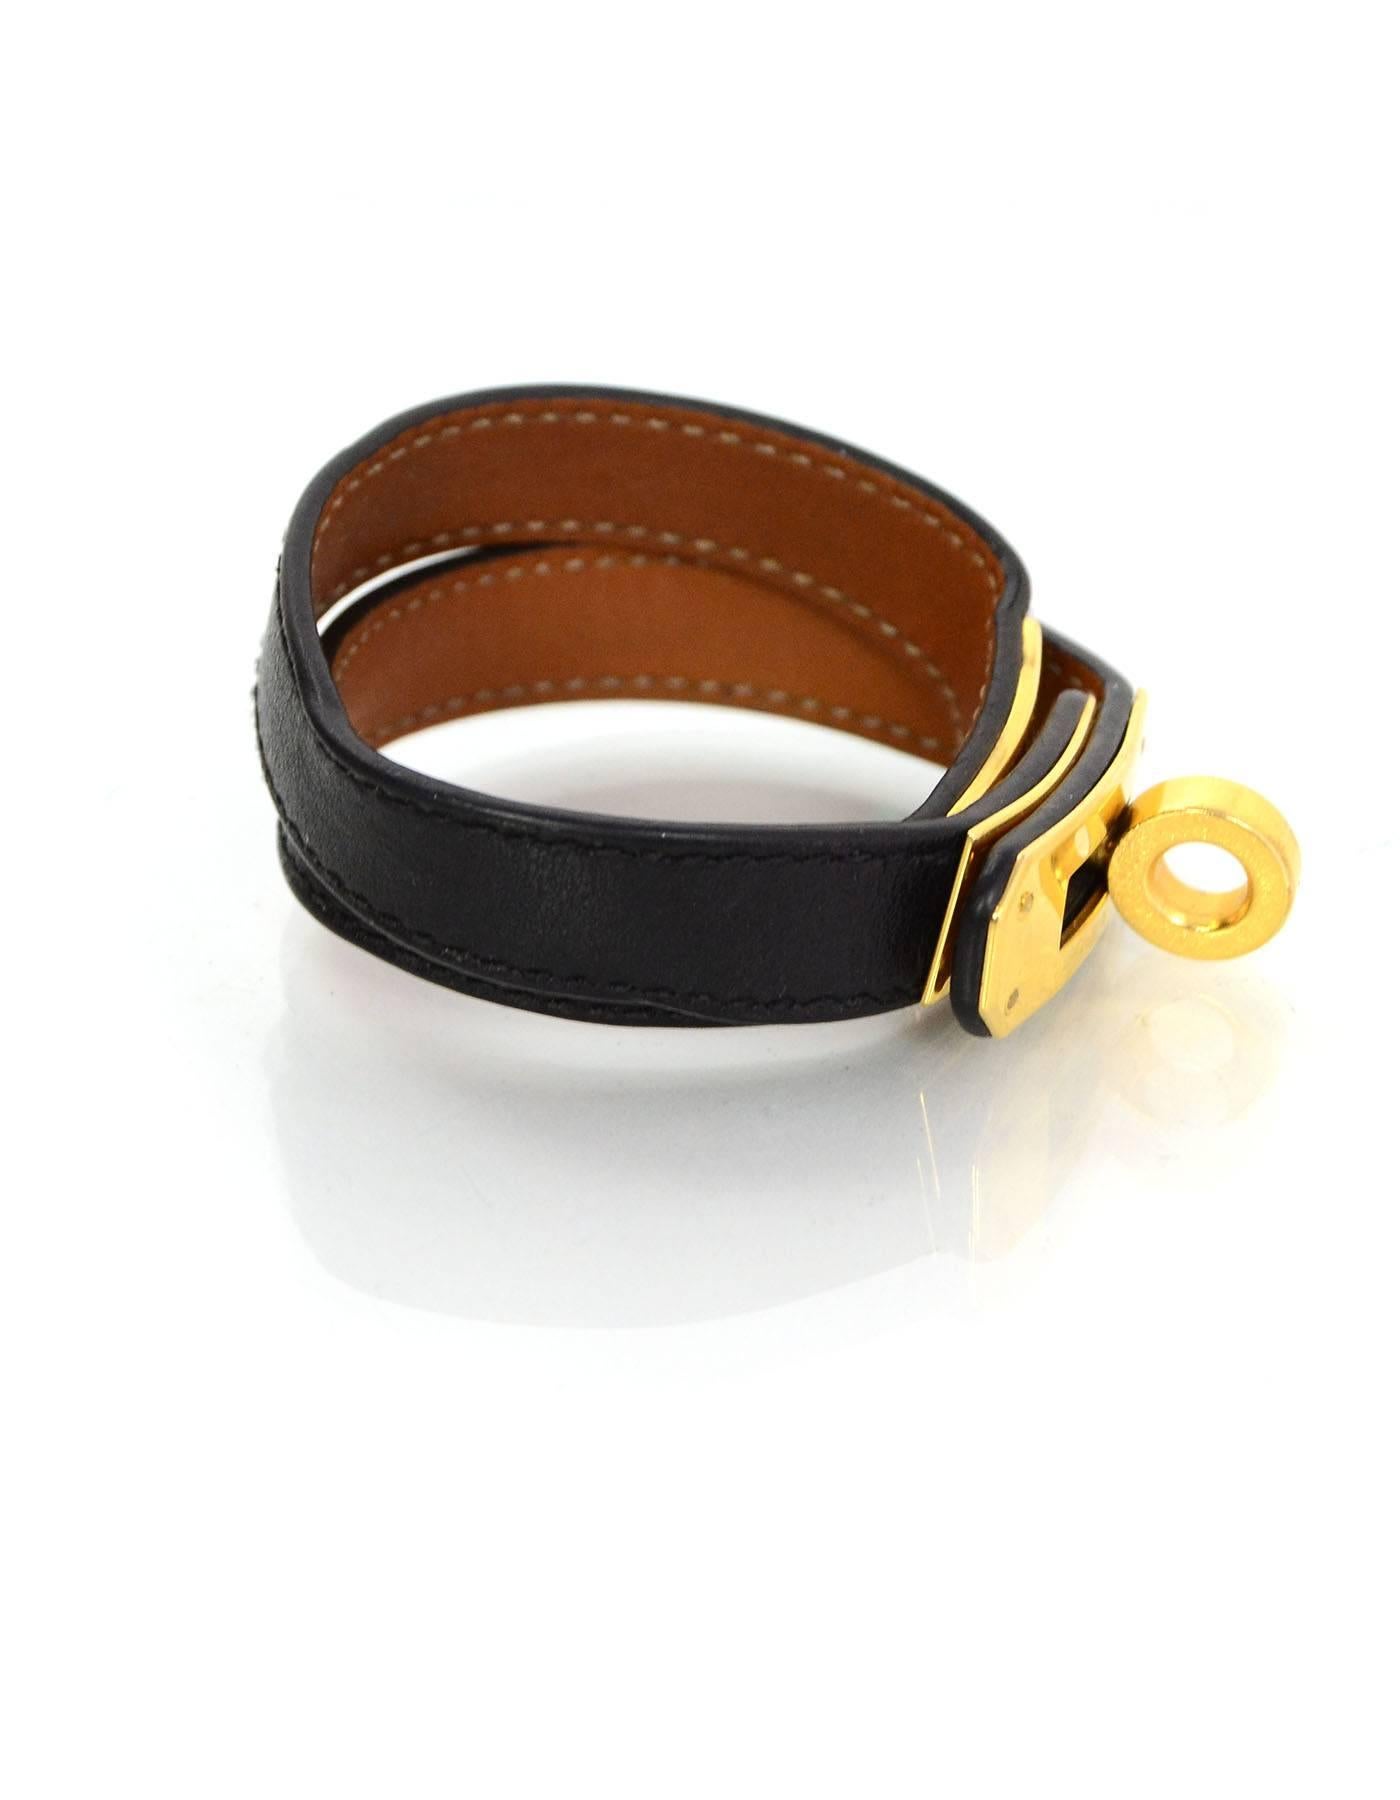 Hermes Black Kelly Double Tour Bracelet

Year of Production: 2011
Color: Black
Hardware: Goldtone
Materials: Leather and metal
Closure: Hook clasp
Stamp: O stamp in square
Retail Price: $510 + tax
Overall Condition: Very good pre-owned condition